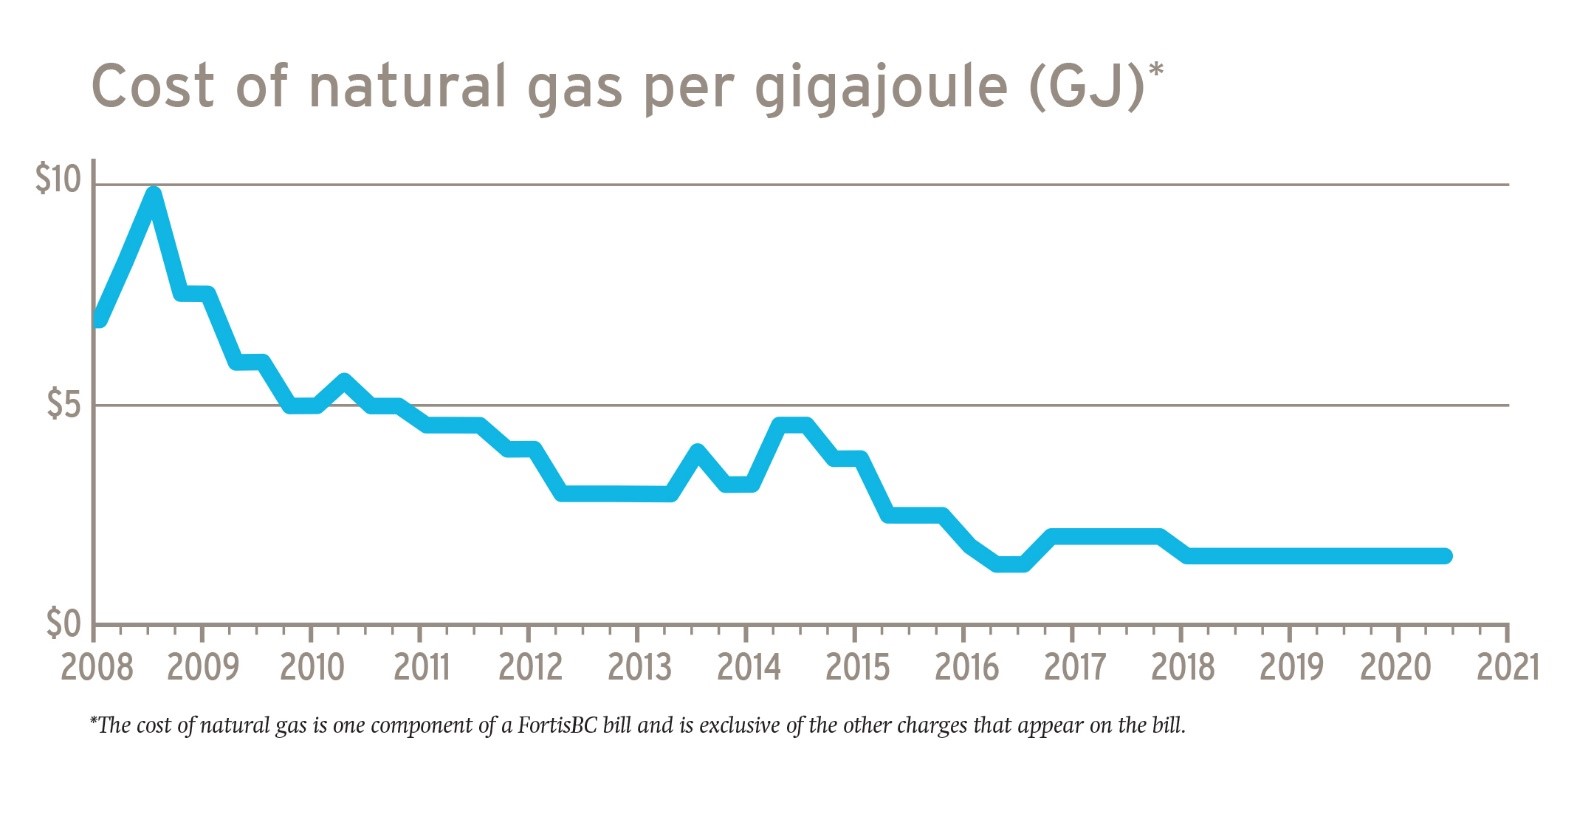 Cost of natural gas historical data